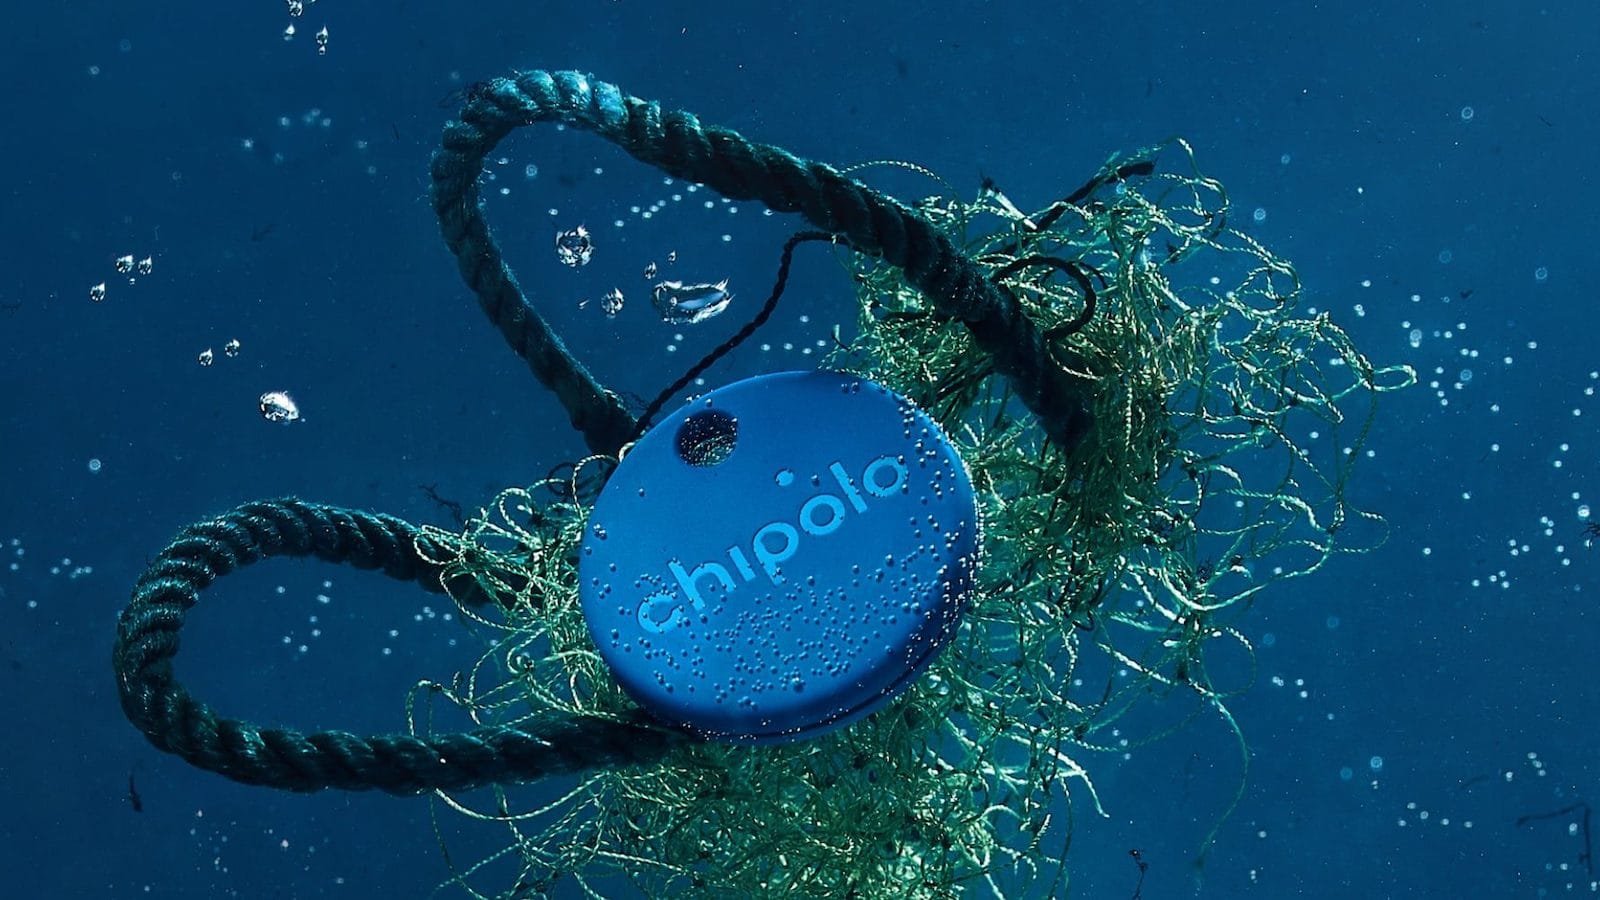 Chipolo ONE Ocean Edition key finder is made from recycled fishing nets